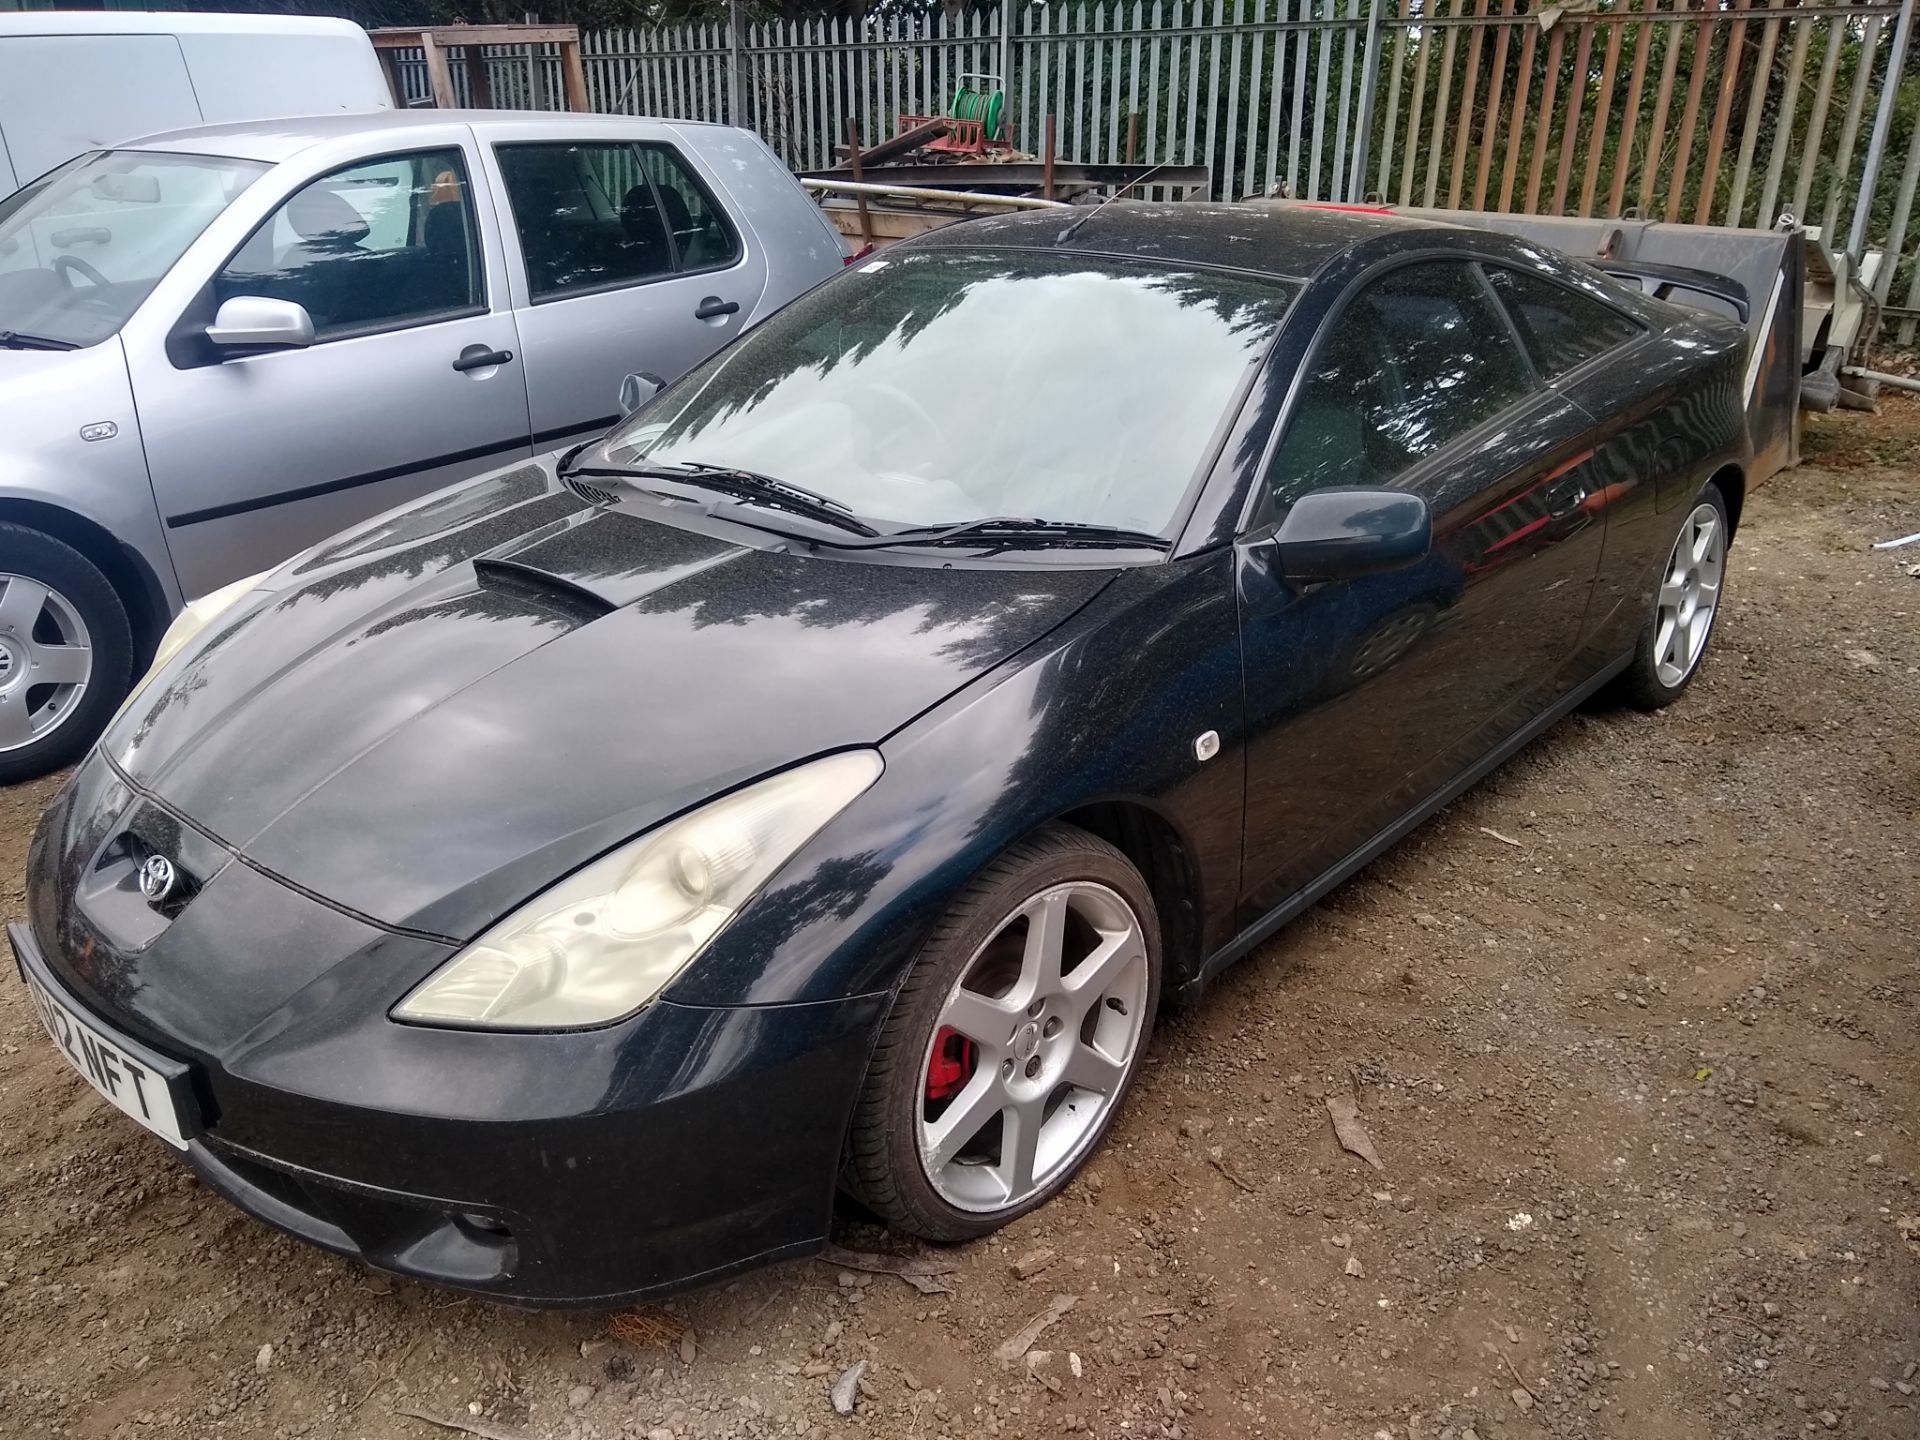 Toyota Celica VVTi coupe, 1794cc, unused for 3 years, runs and drives, no rear silencer, W612 NFT - Image 8 of 9